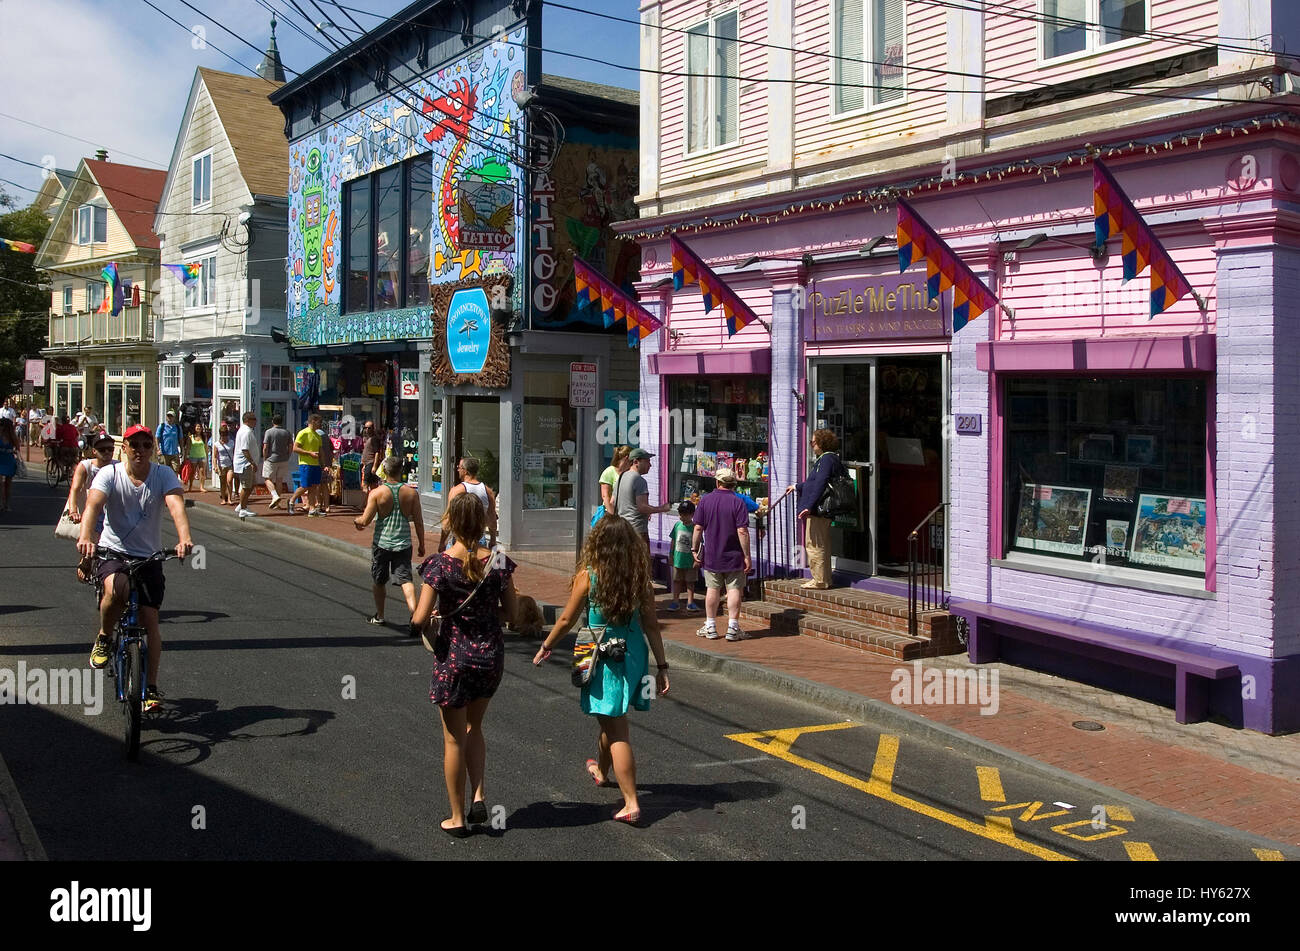 Shops and shoppers along Commercial Street in Provincetown, Massachusetts Stock Photo